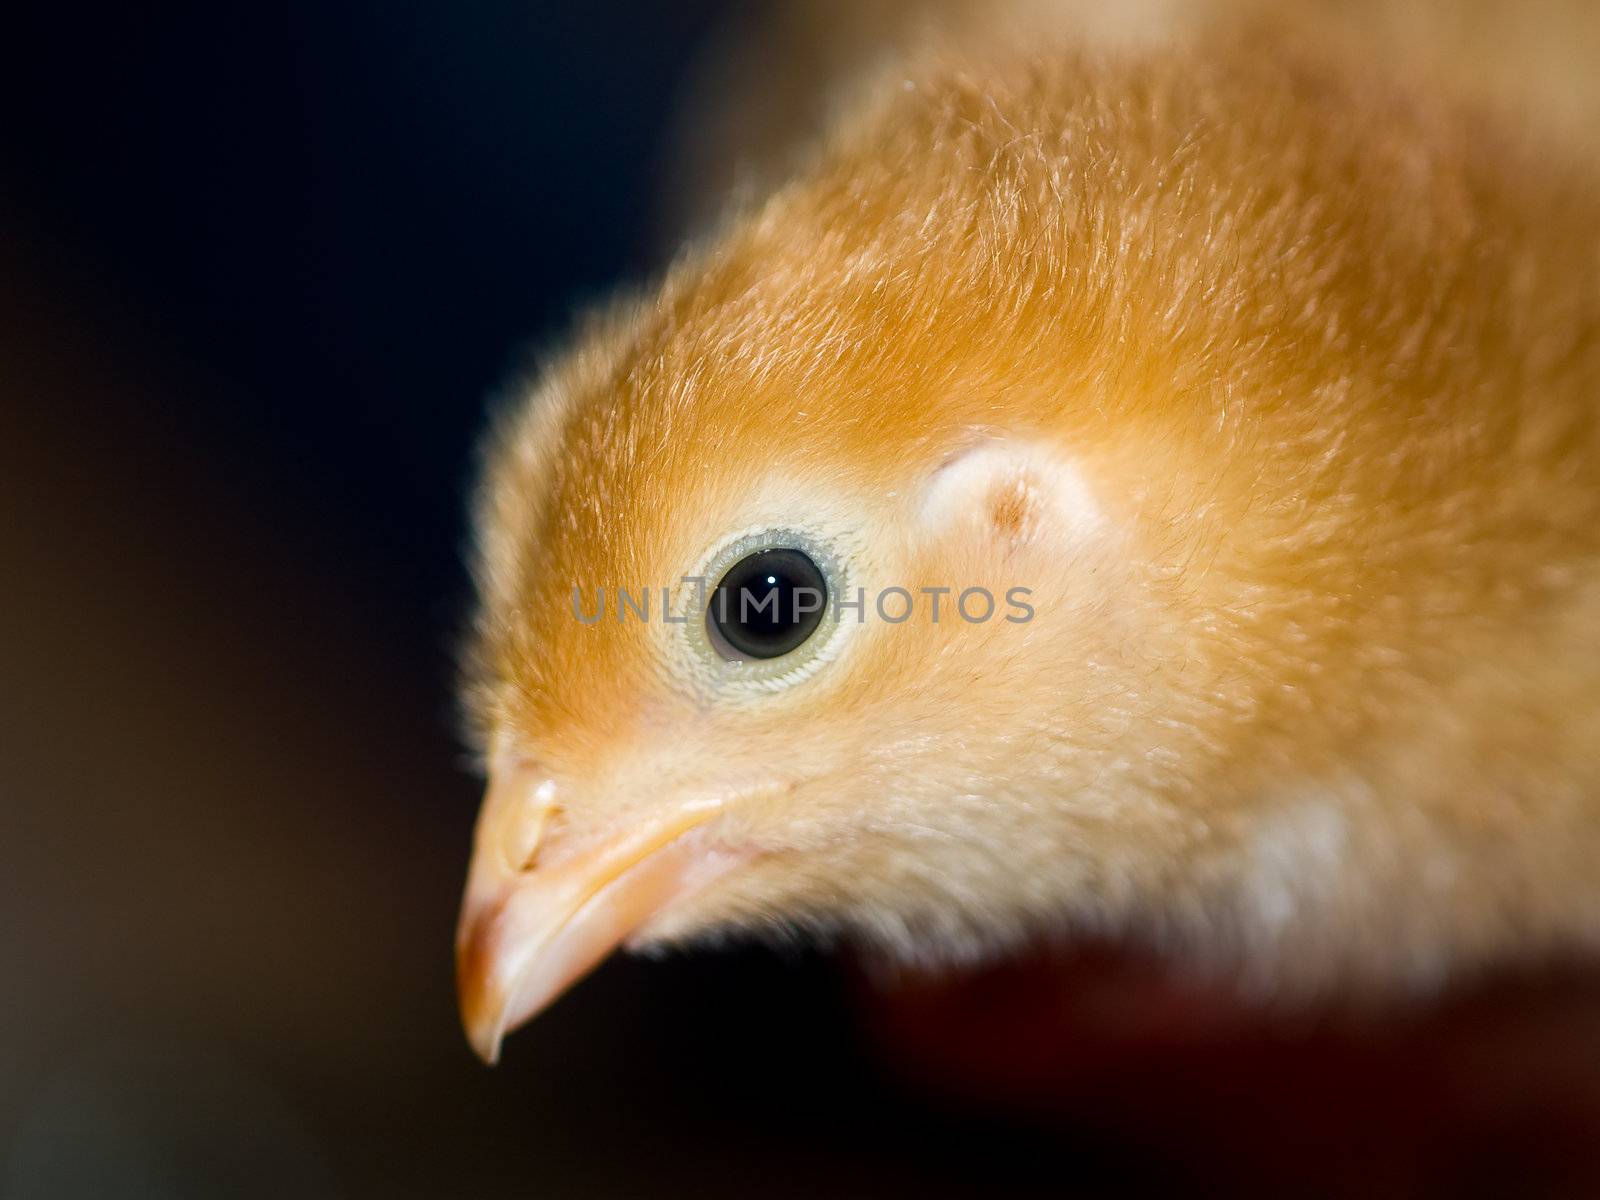 Little yellow and orange fuzzy chick by Frankljunior